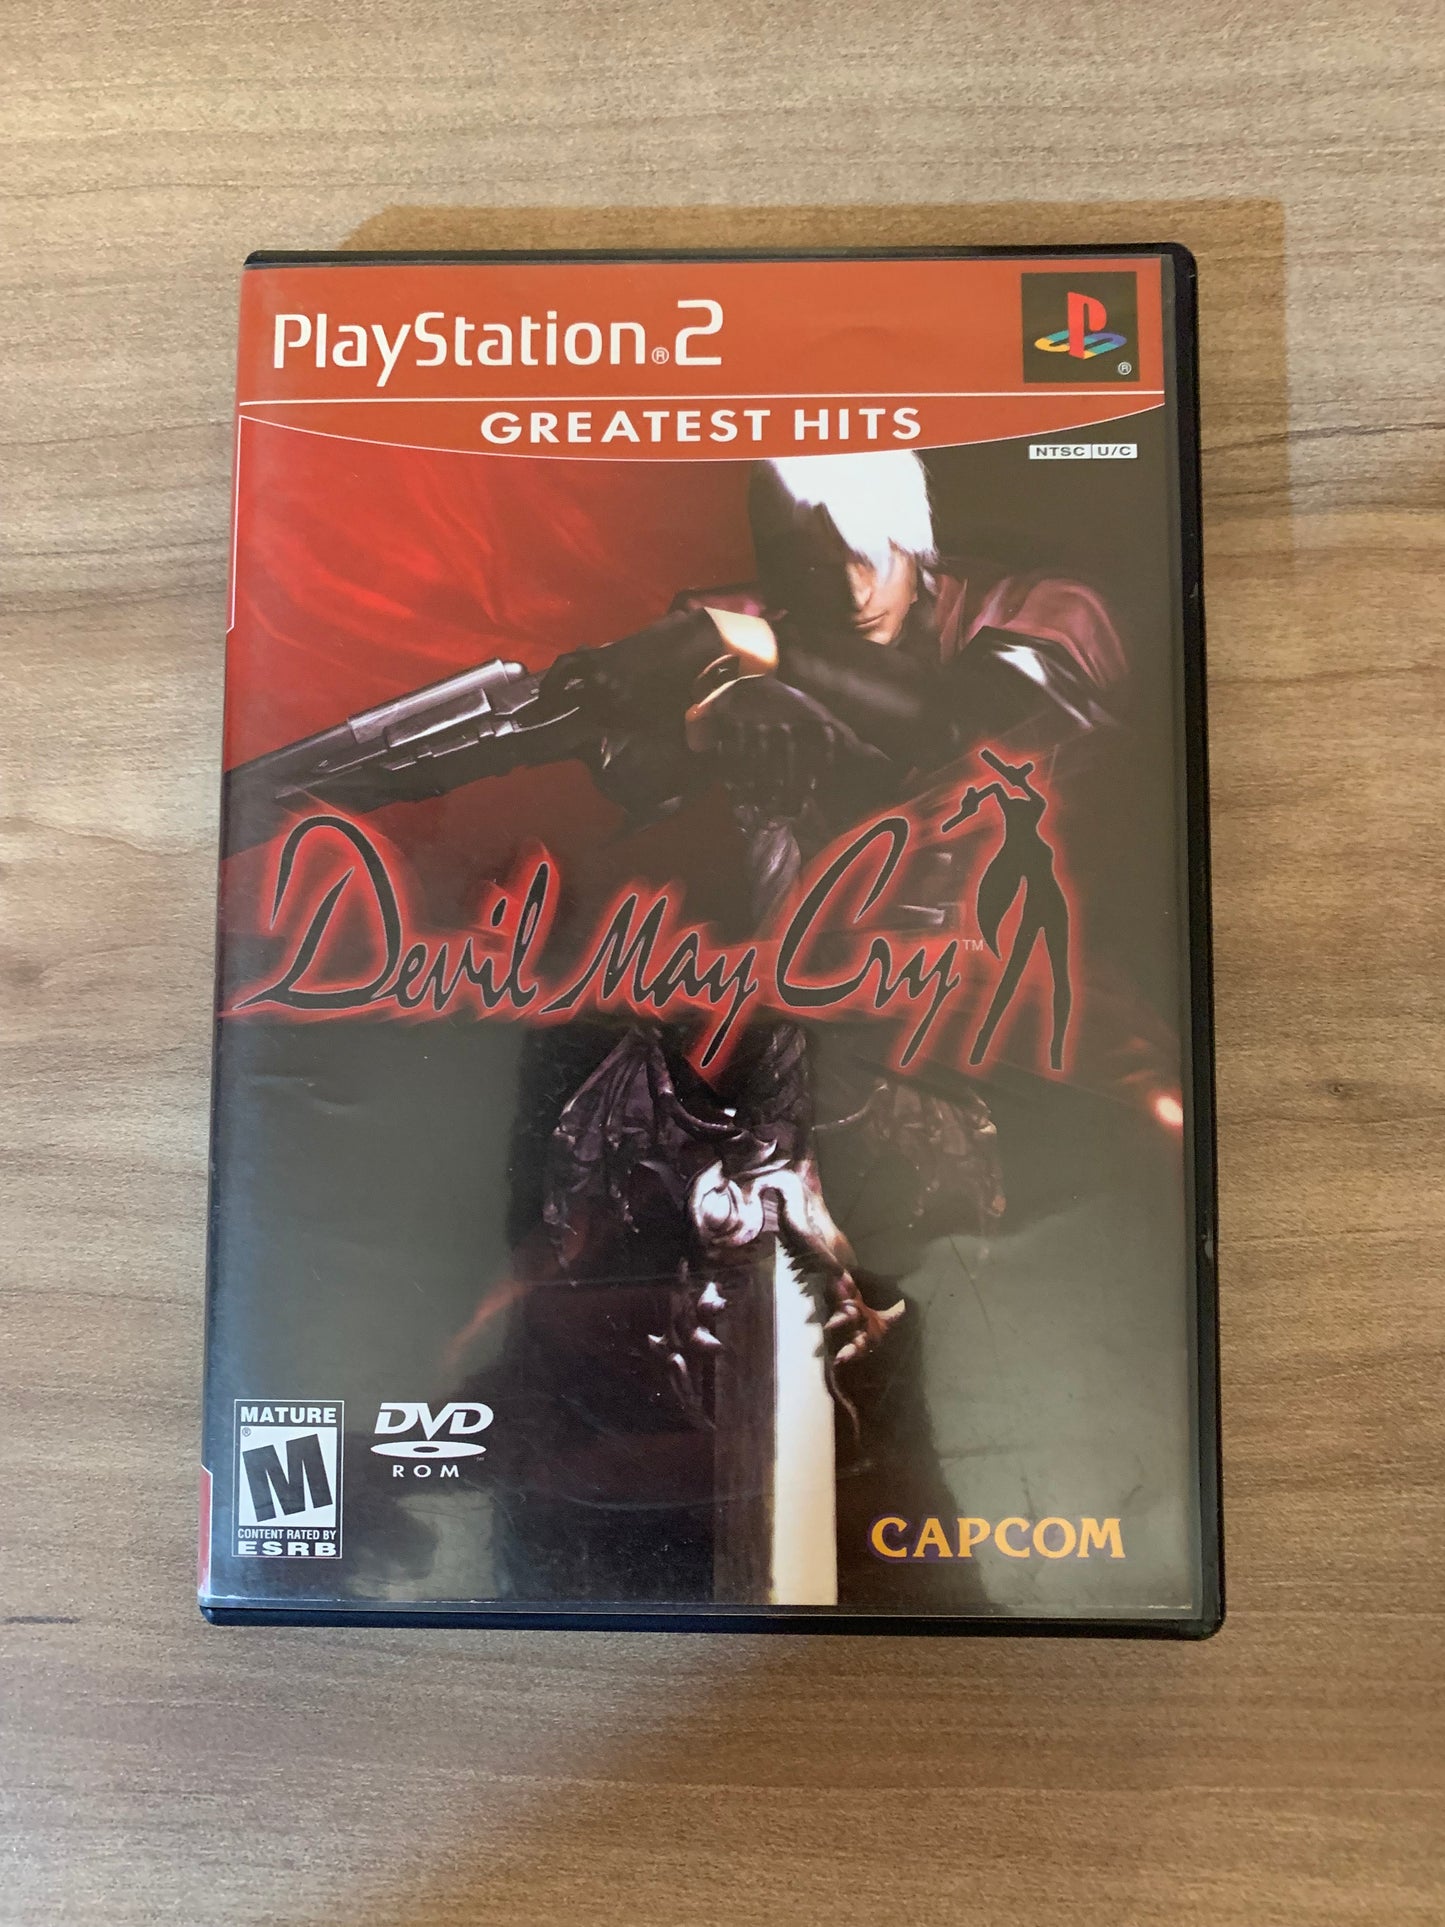 SONY PLAYSTATiON 2 [PS2] | DEViL MAY CRY | GREATEST HiTS